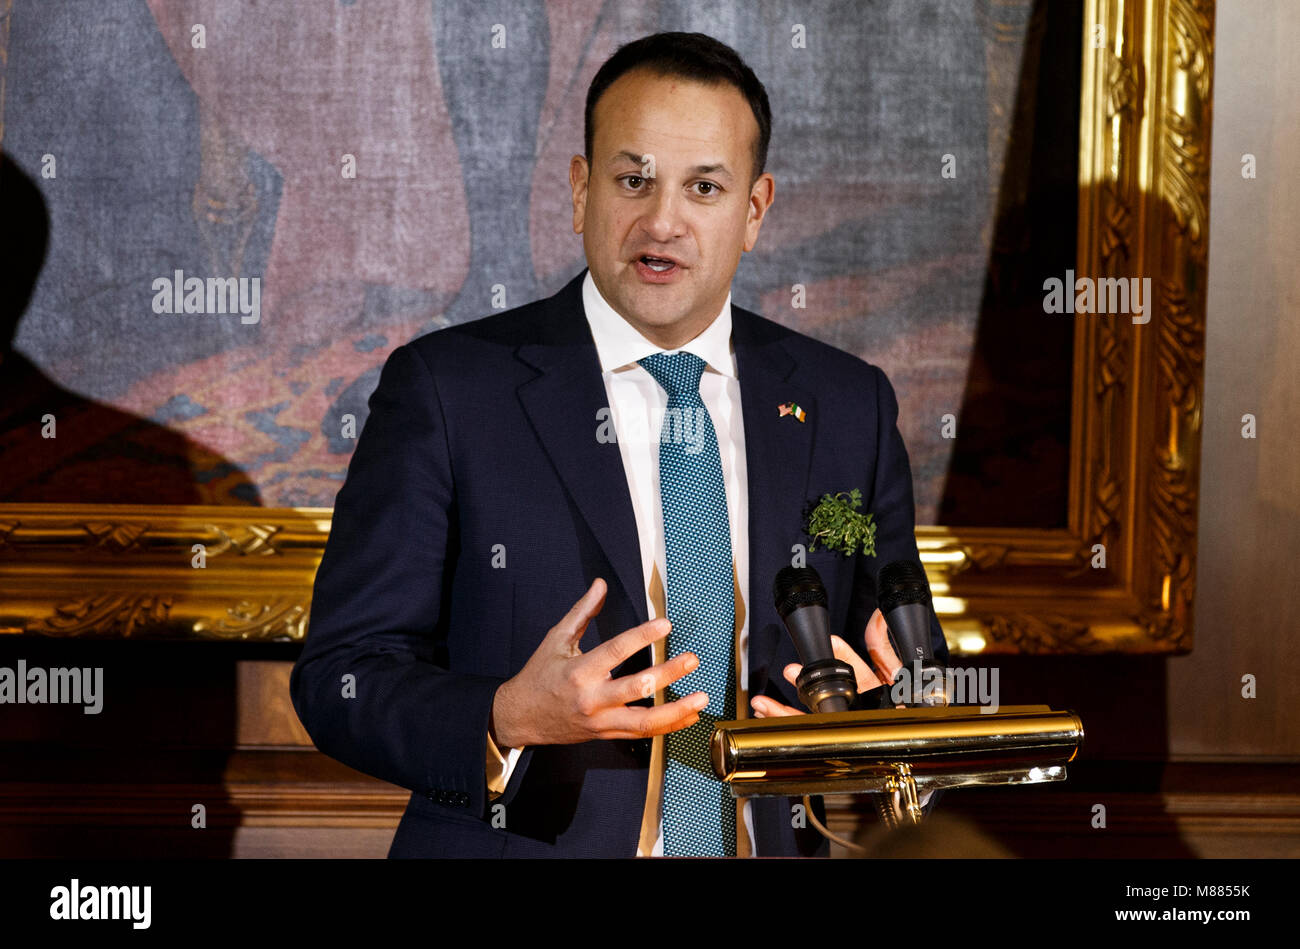 Prime Minister of Ireland Leo Varadkar speaks at the Friends of Ireland luncheon hosted by United States Speaker of the House of Representatives Paul Ryan, Republican of Wisconsin, at the United States Capitol in Washington, DC on March 15, 2018. Credit: Alex Edelman/CNP /MediaPunch Stock Photo